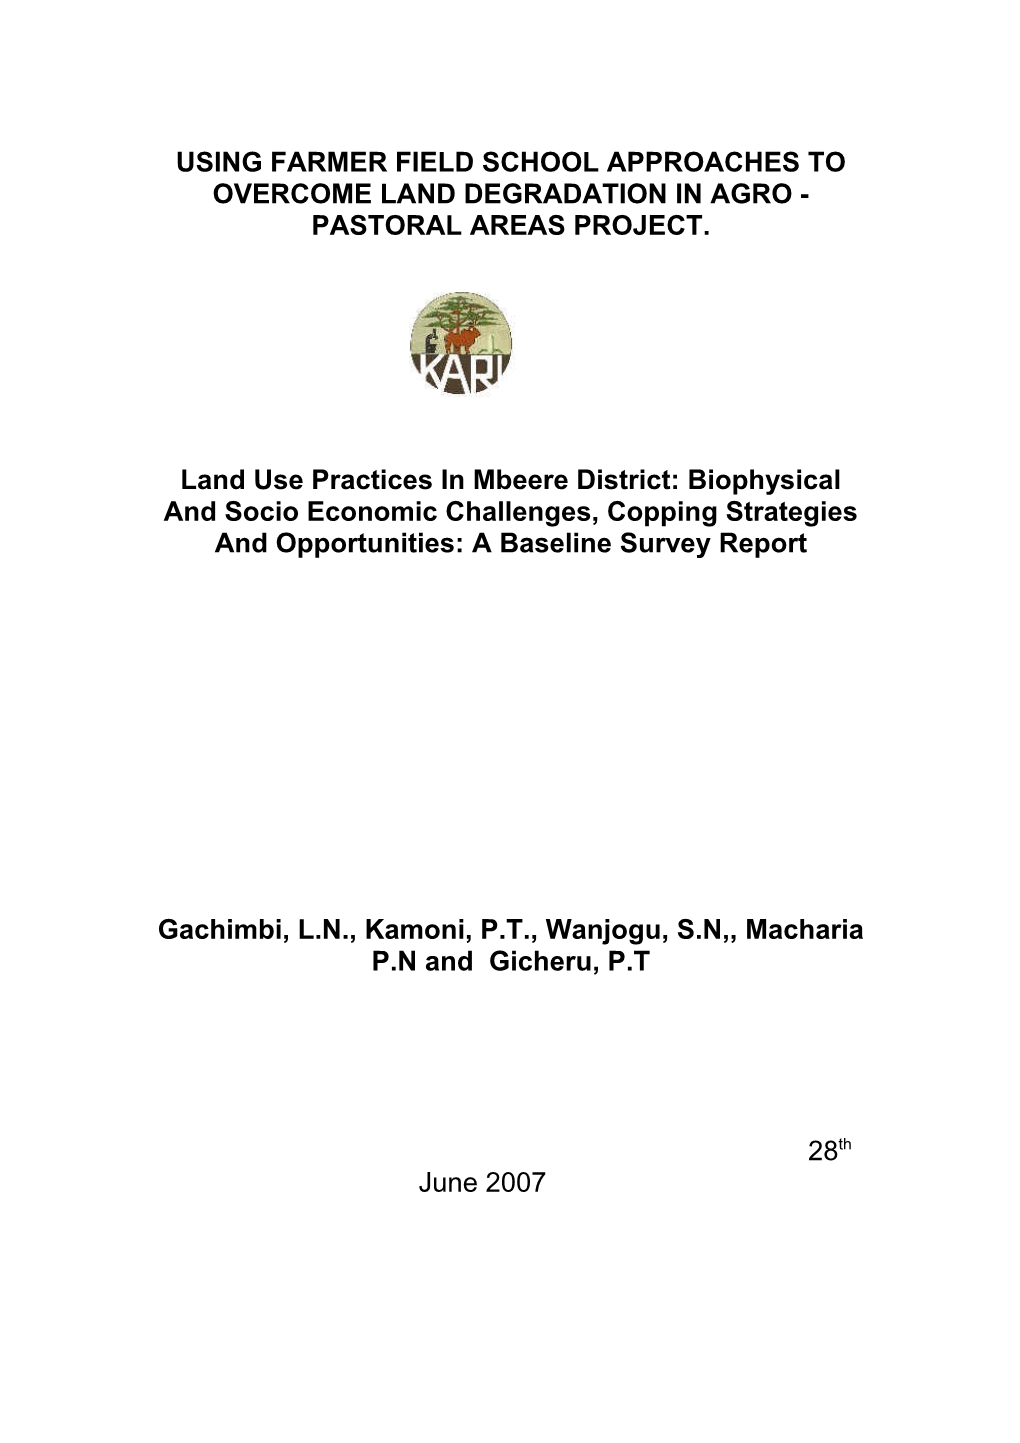 Opportunities And Challenges Of Agricultural Production In Semi-Arid Mbeere District Of Kenya